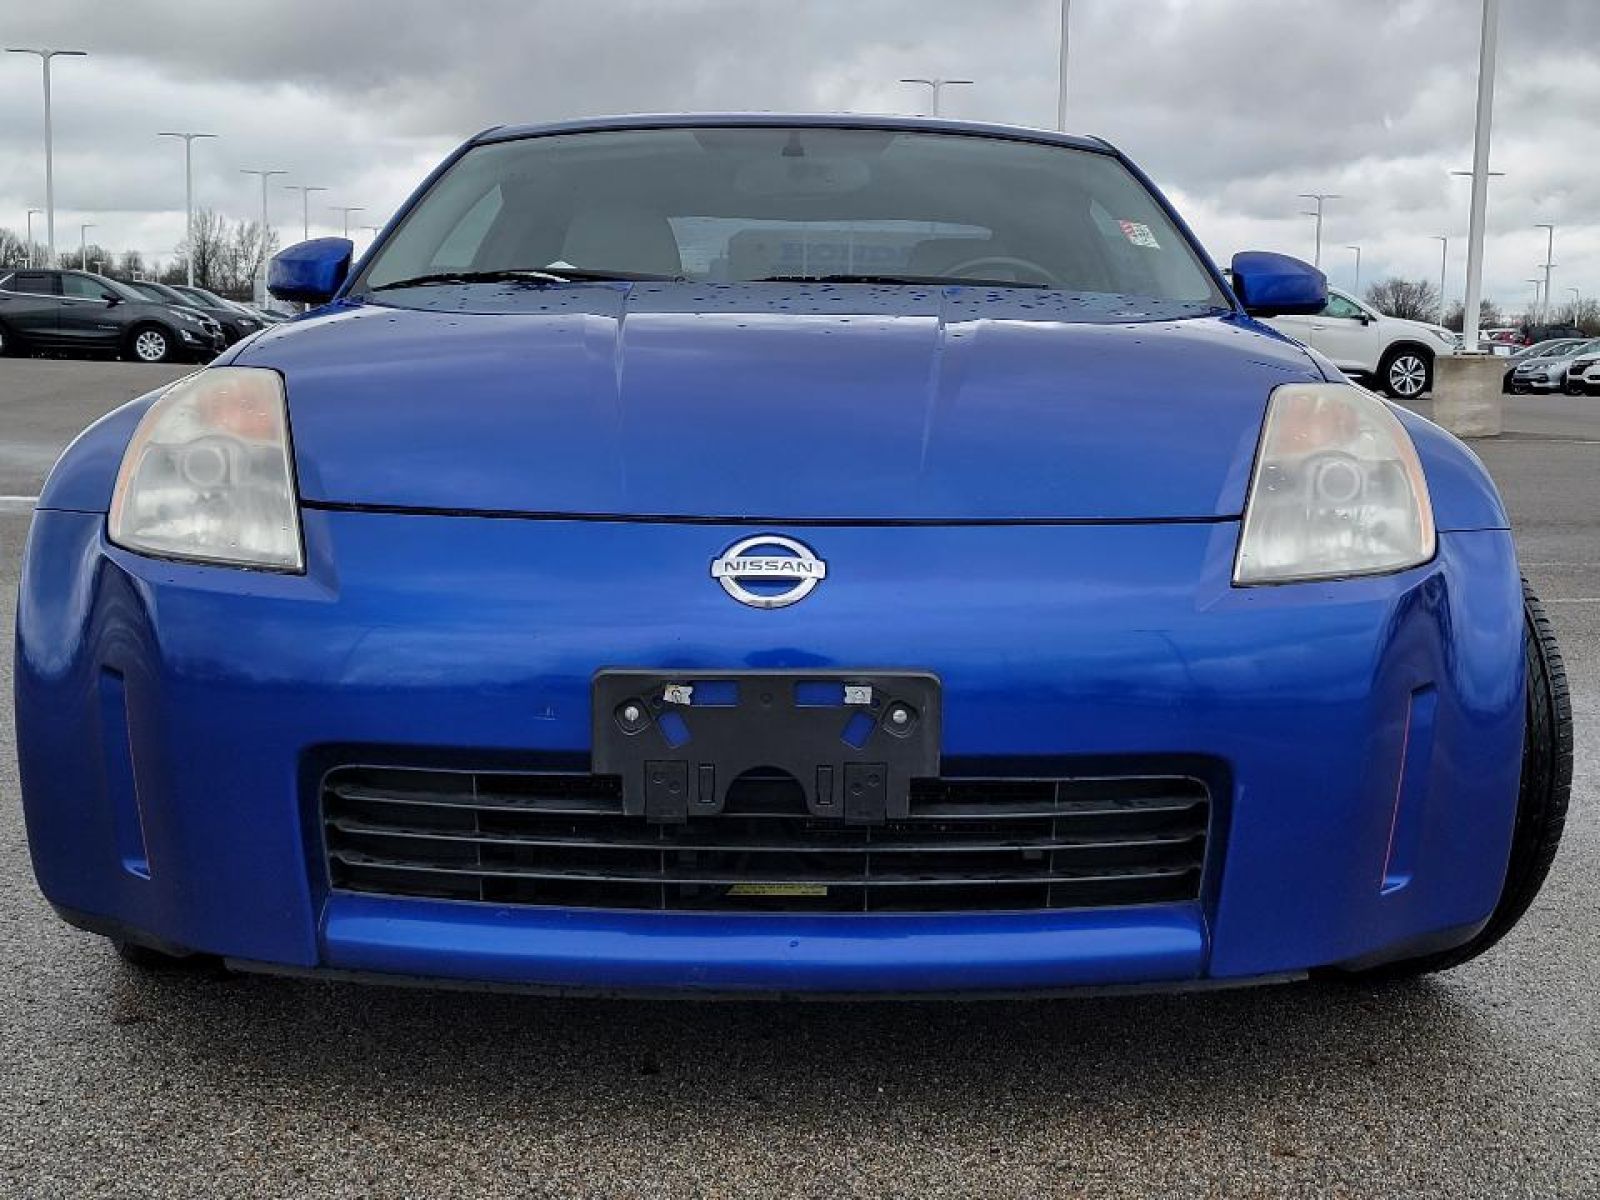 Used, 2004 Nissan 350Z Touring, Blue, P0511-4